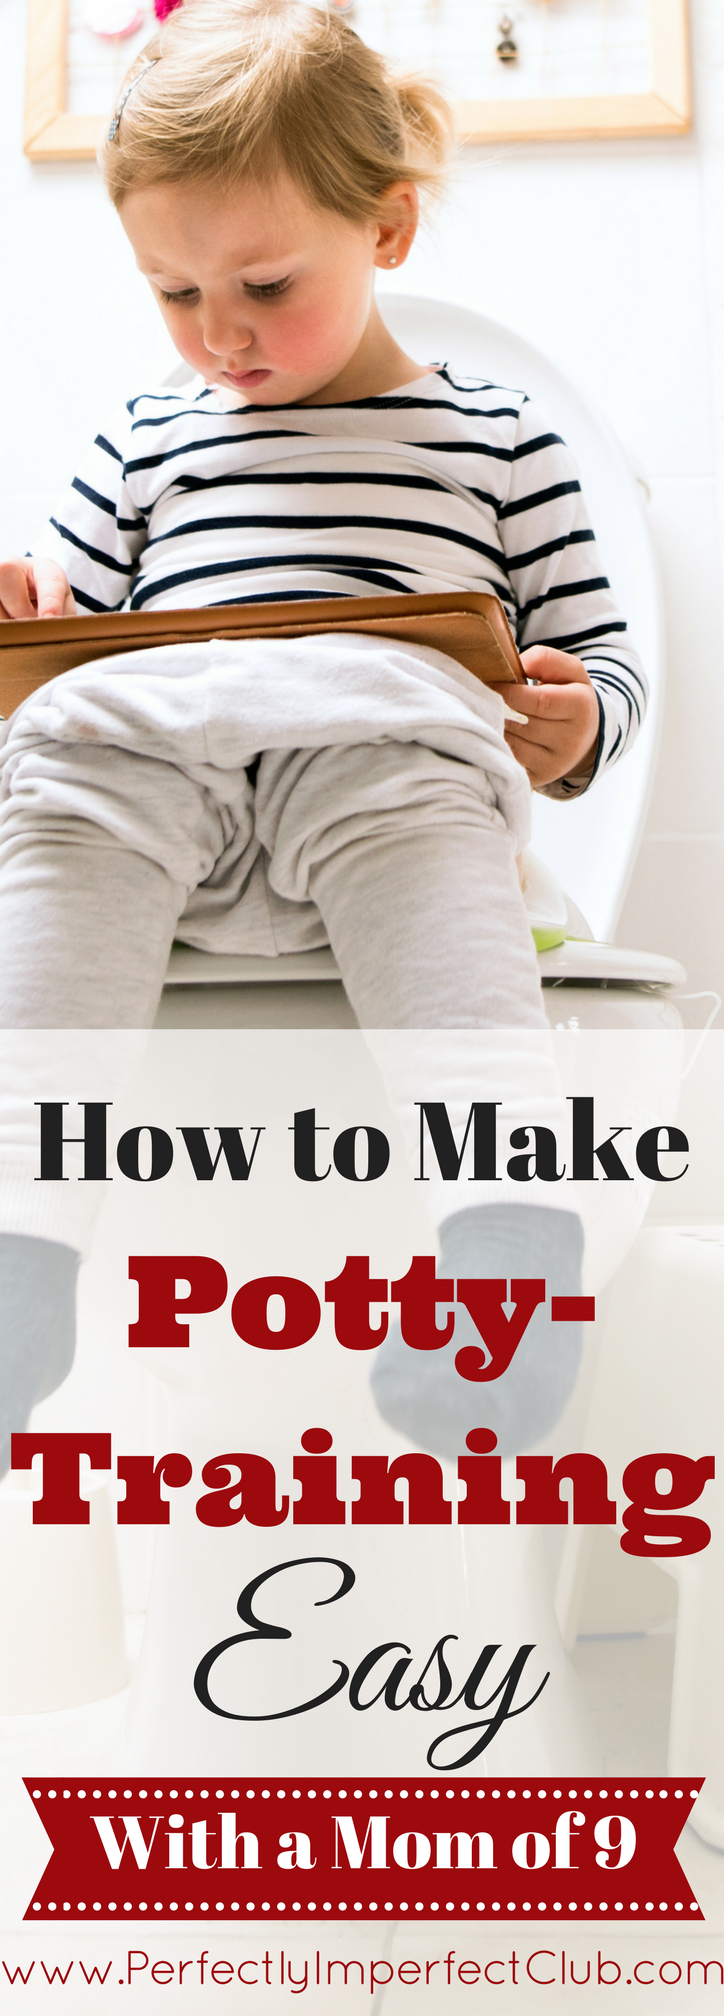 This mom of 9 gives tips on how to make potty training go as smoothly as possible.